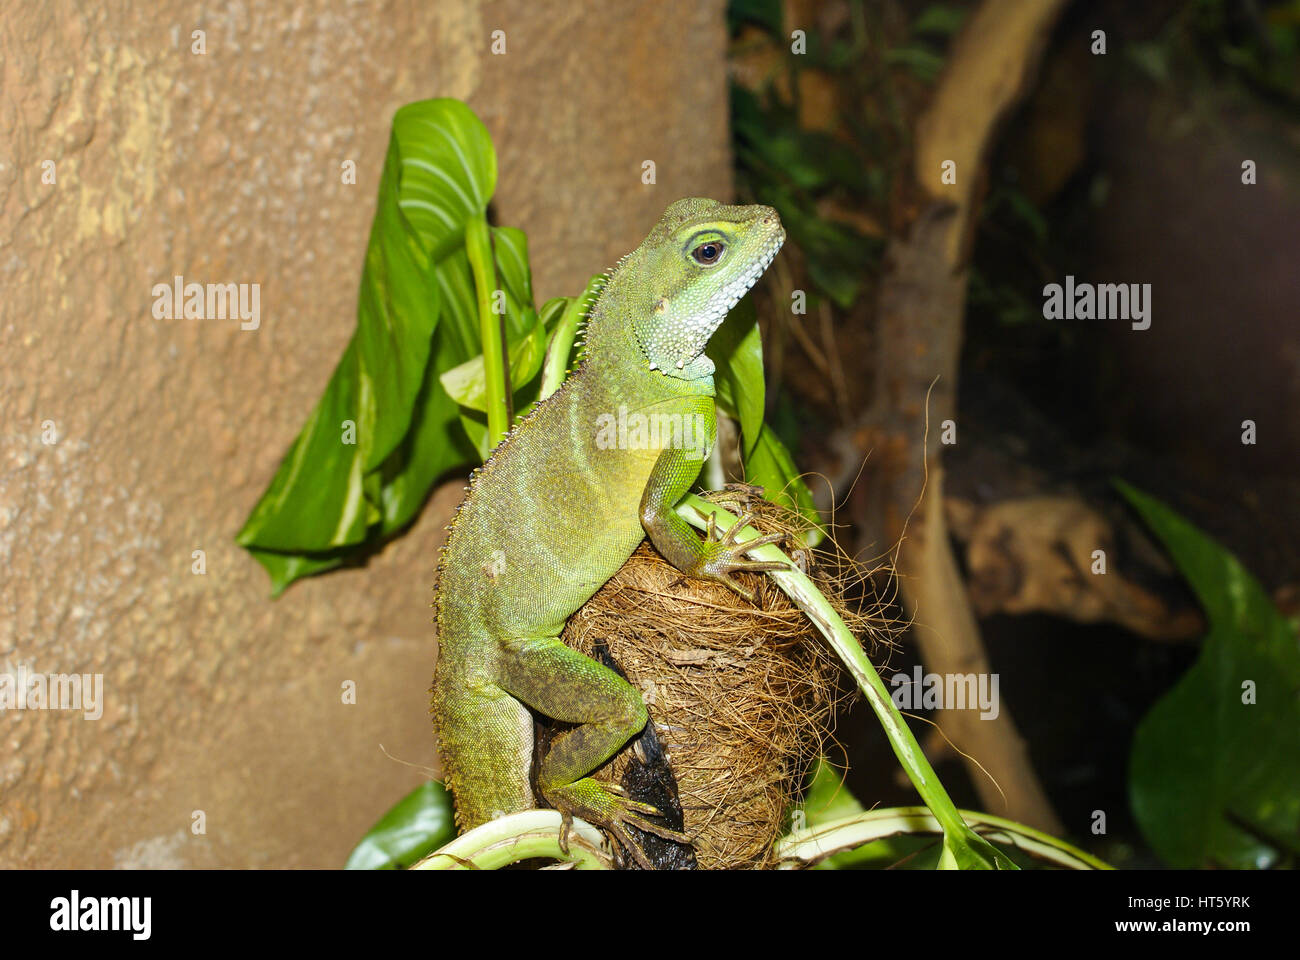 Animals. Funny situations. Stock Photo